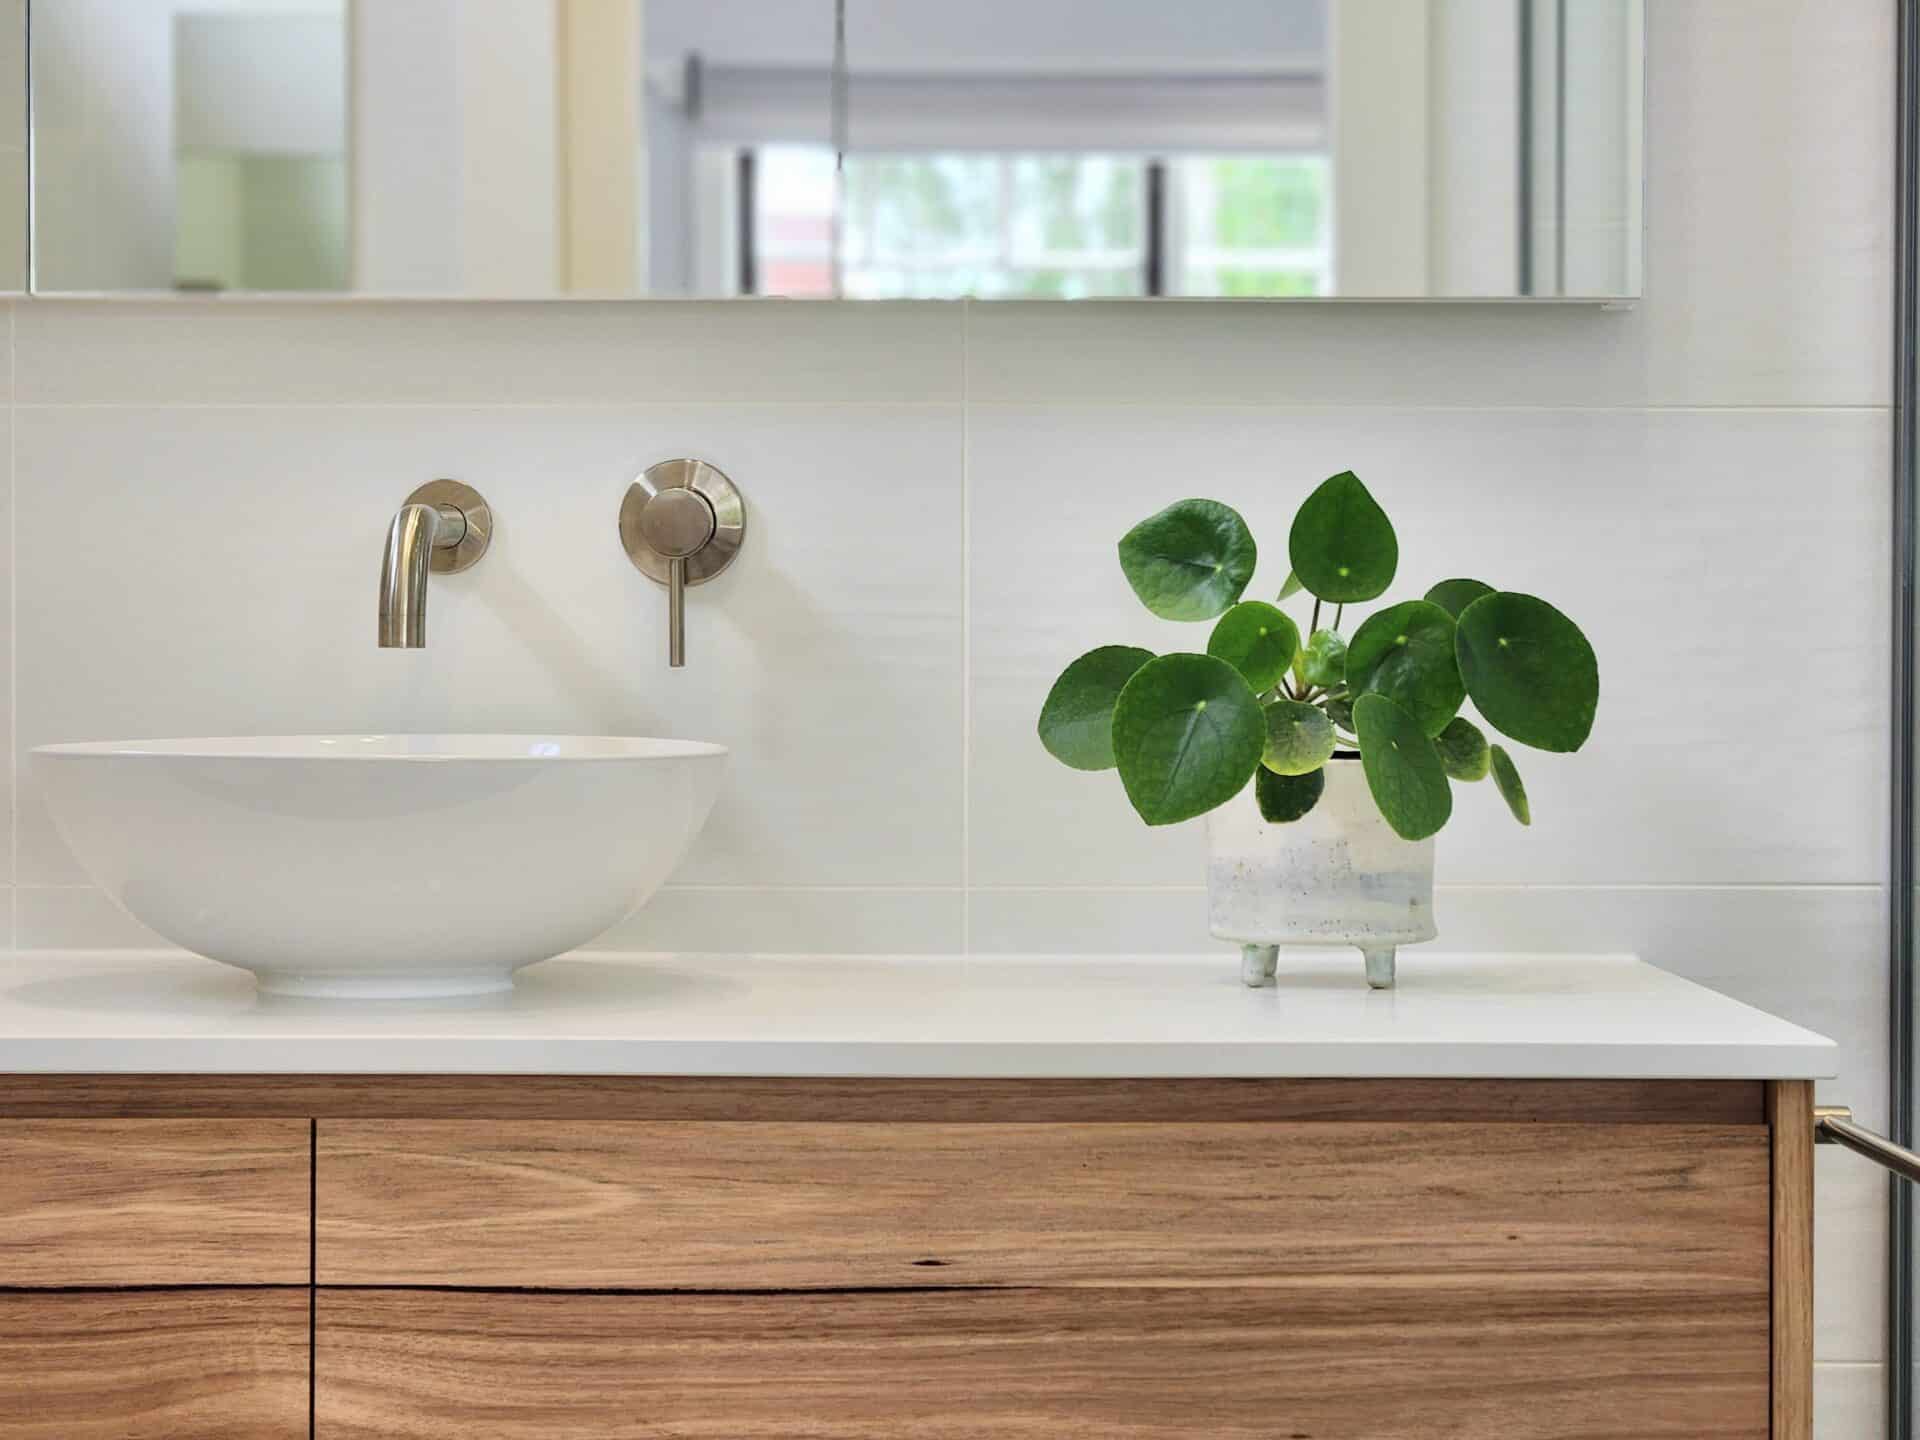 A bathroom sink and a plant on a counter.